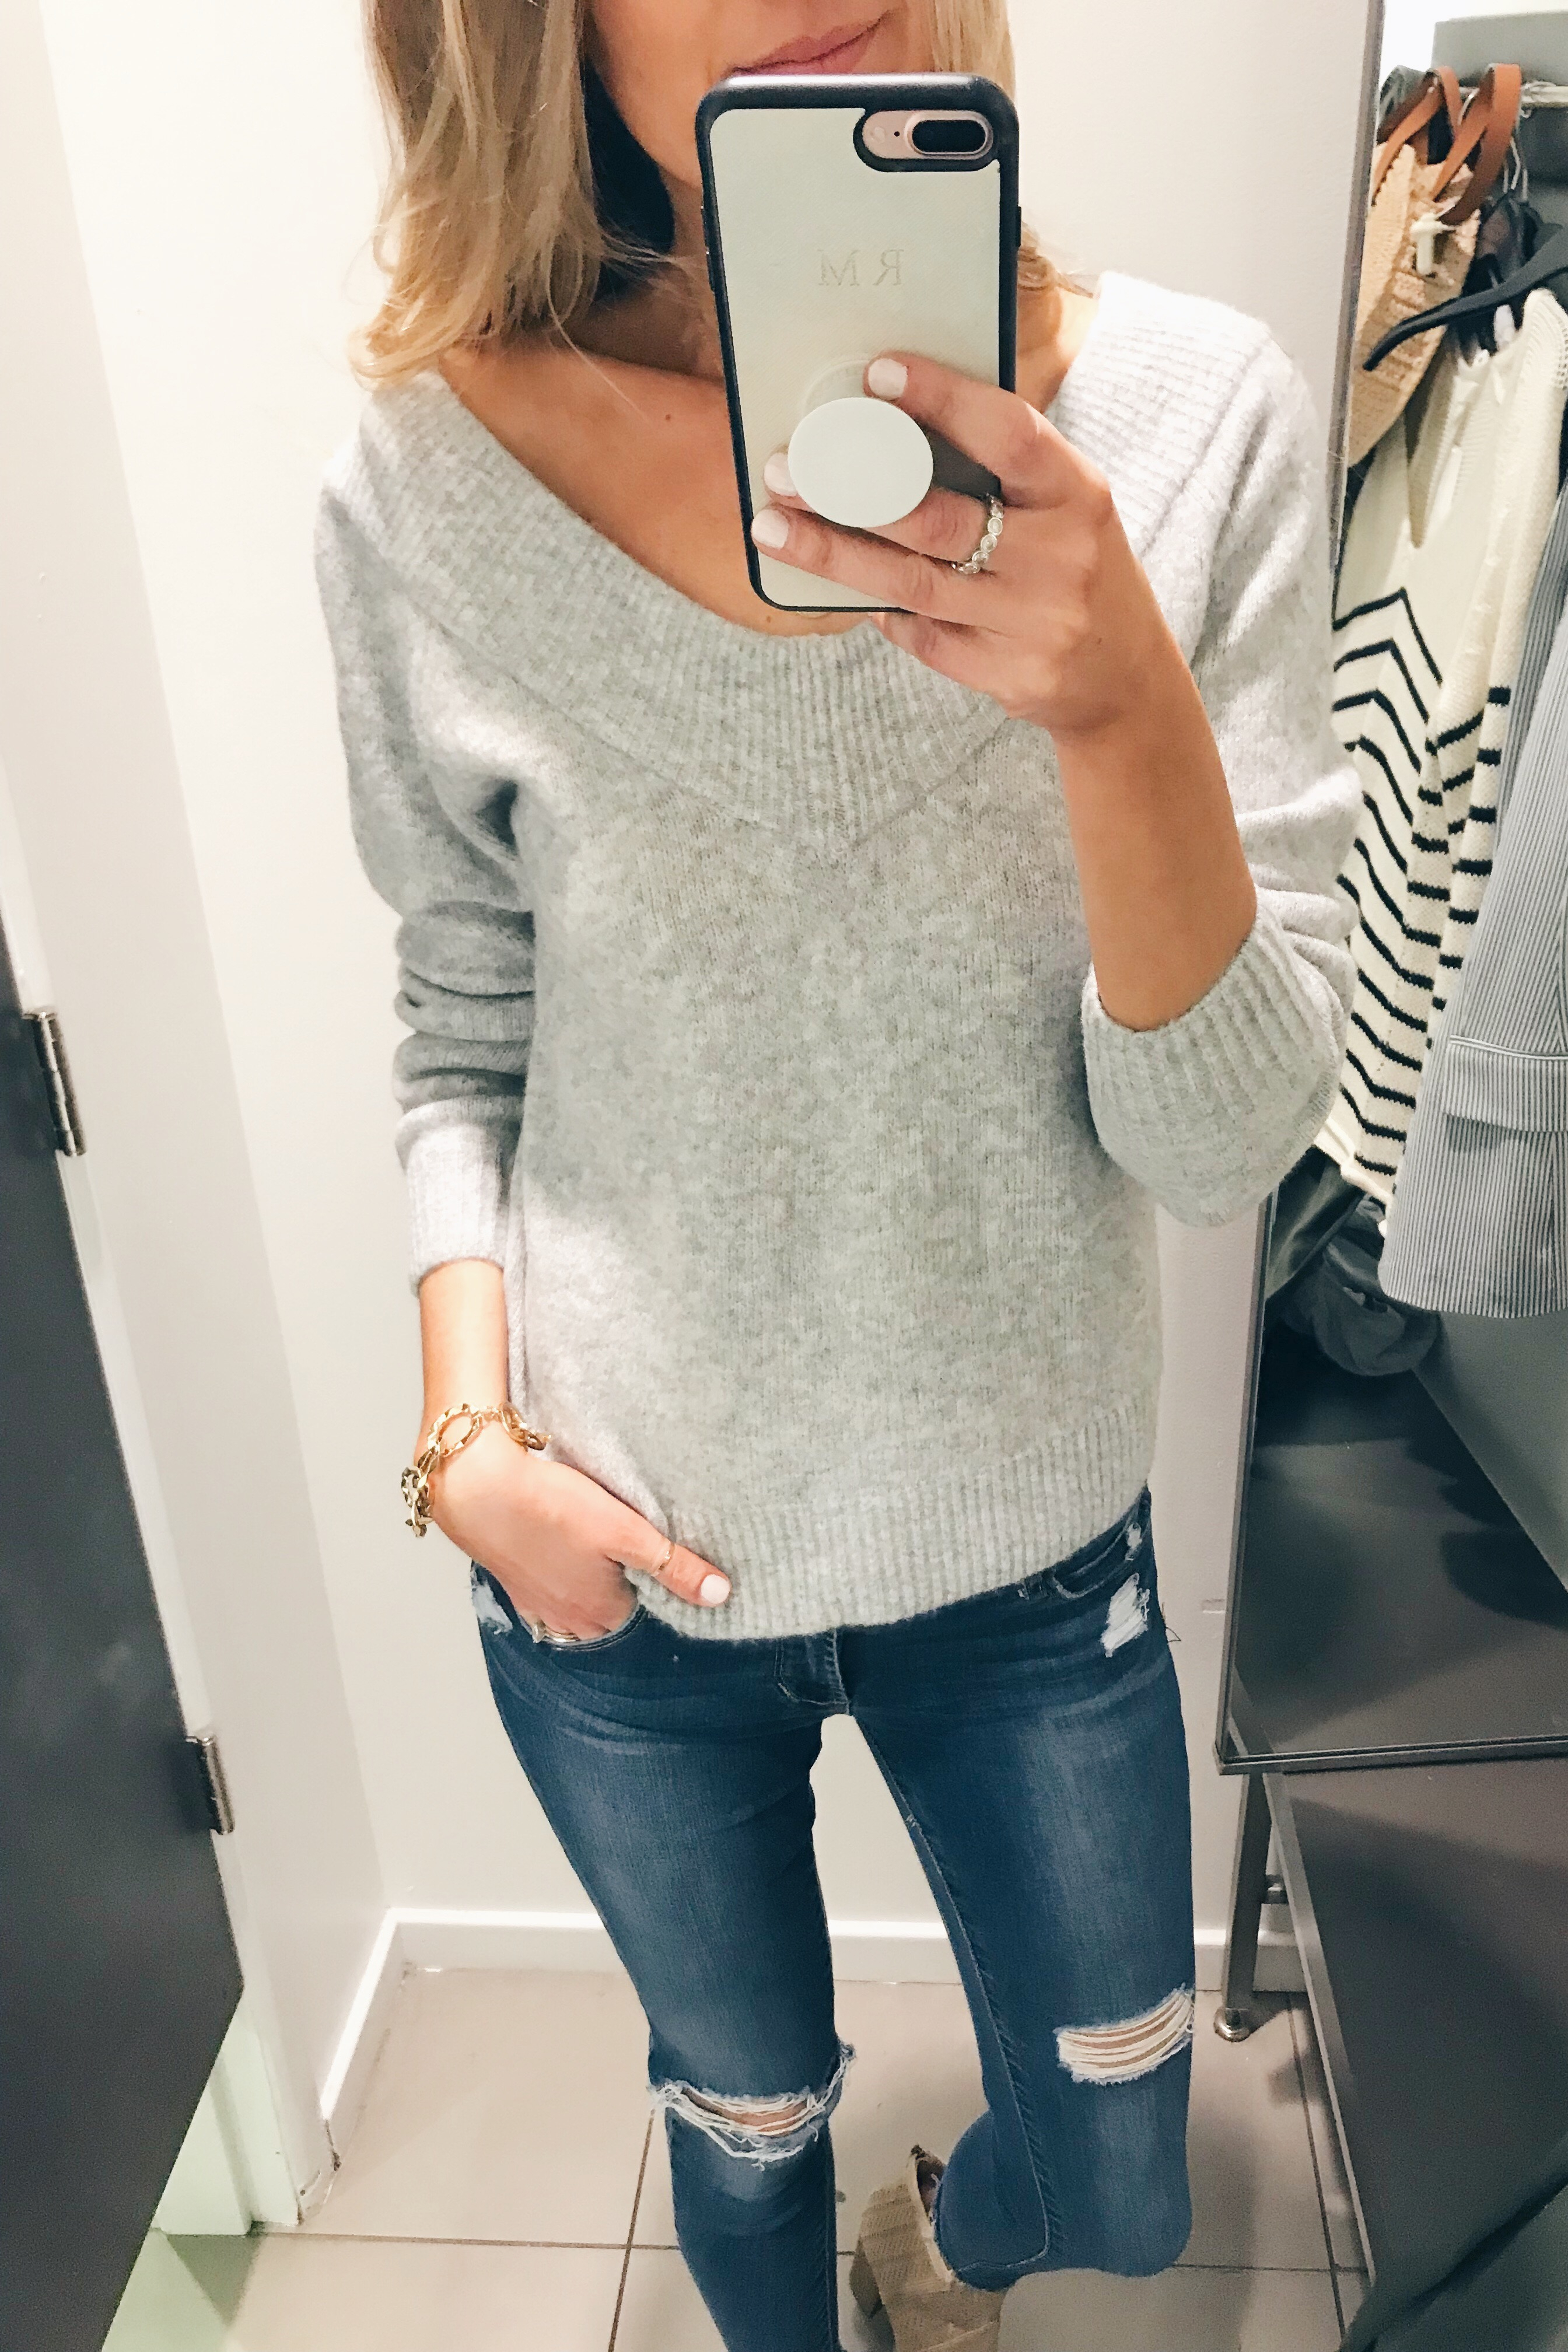 hm try on march 2019 - gray sweater - pinteresting plans blog